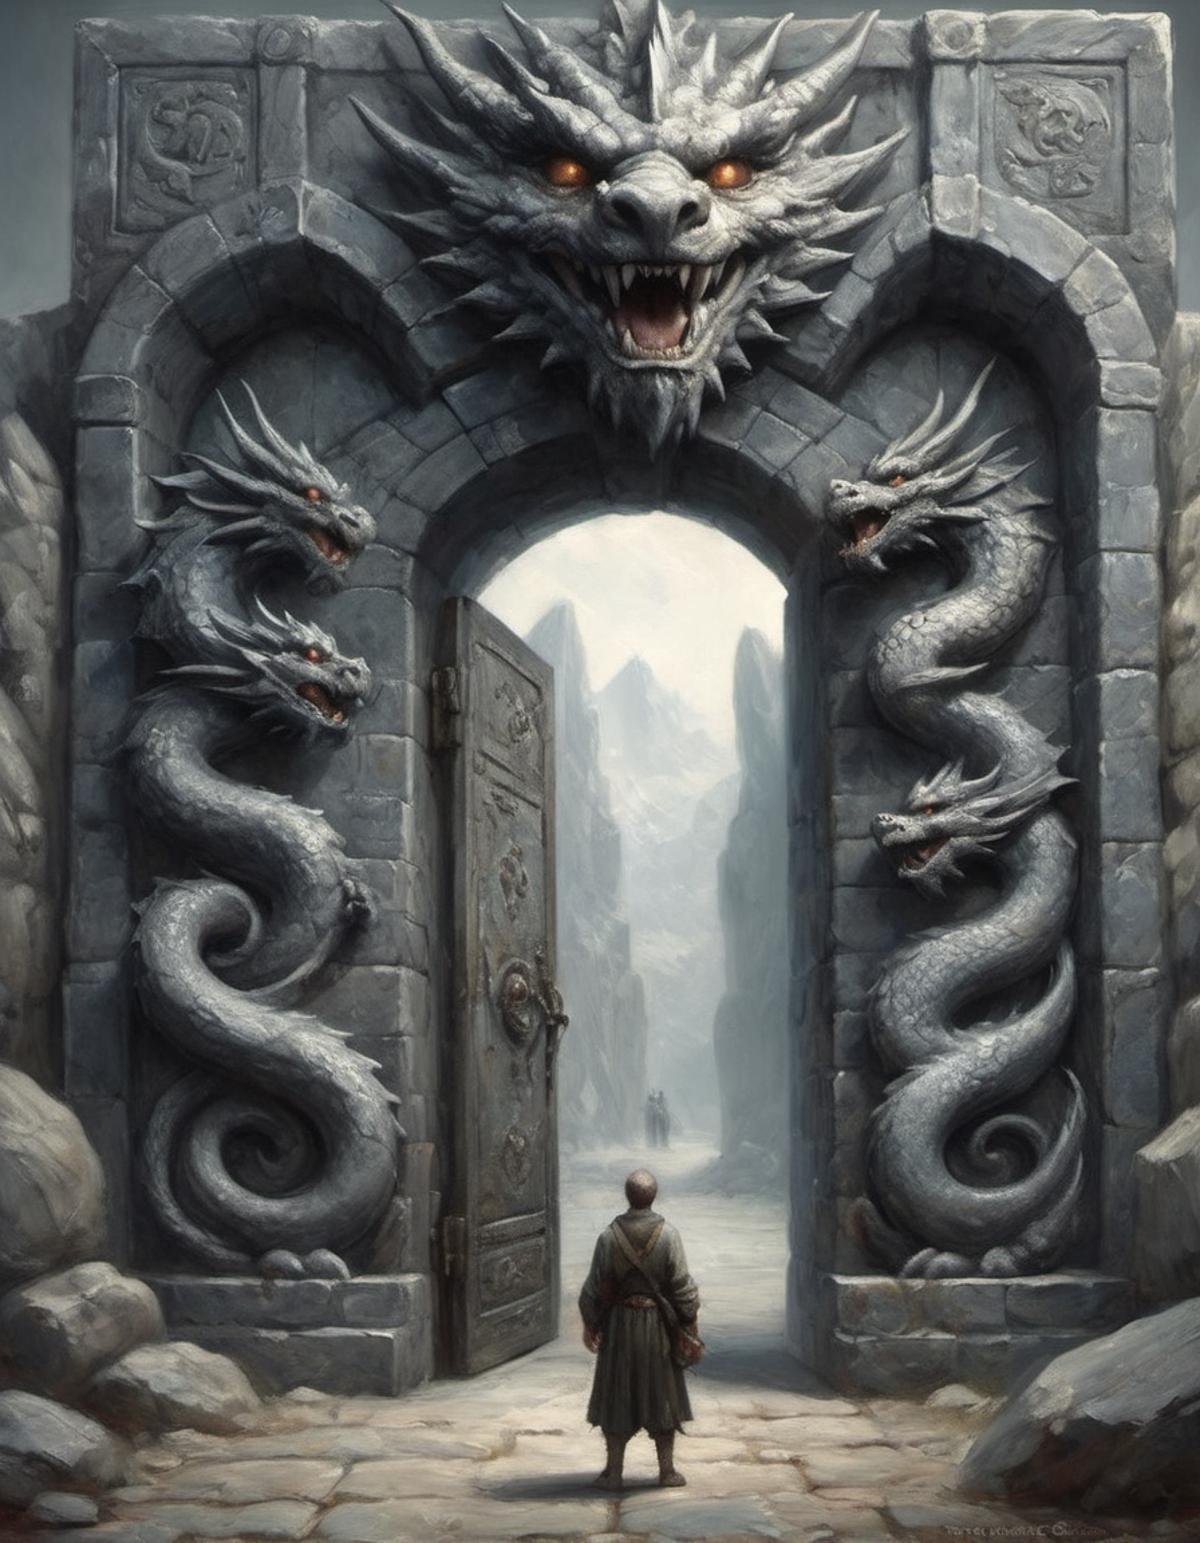 A man walking through a stone doorway with two dragon statues on either side of the entrance.